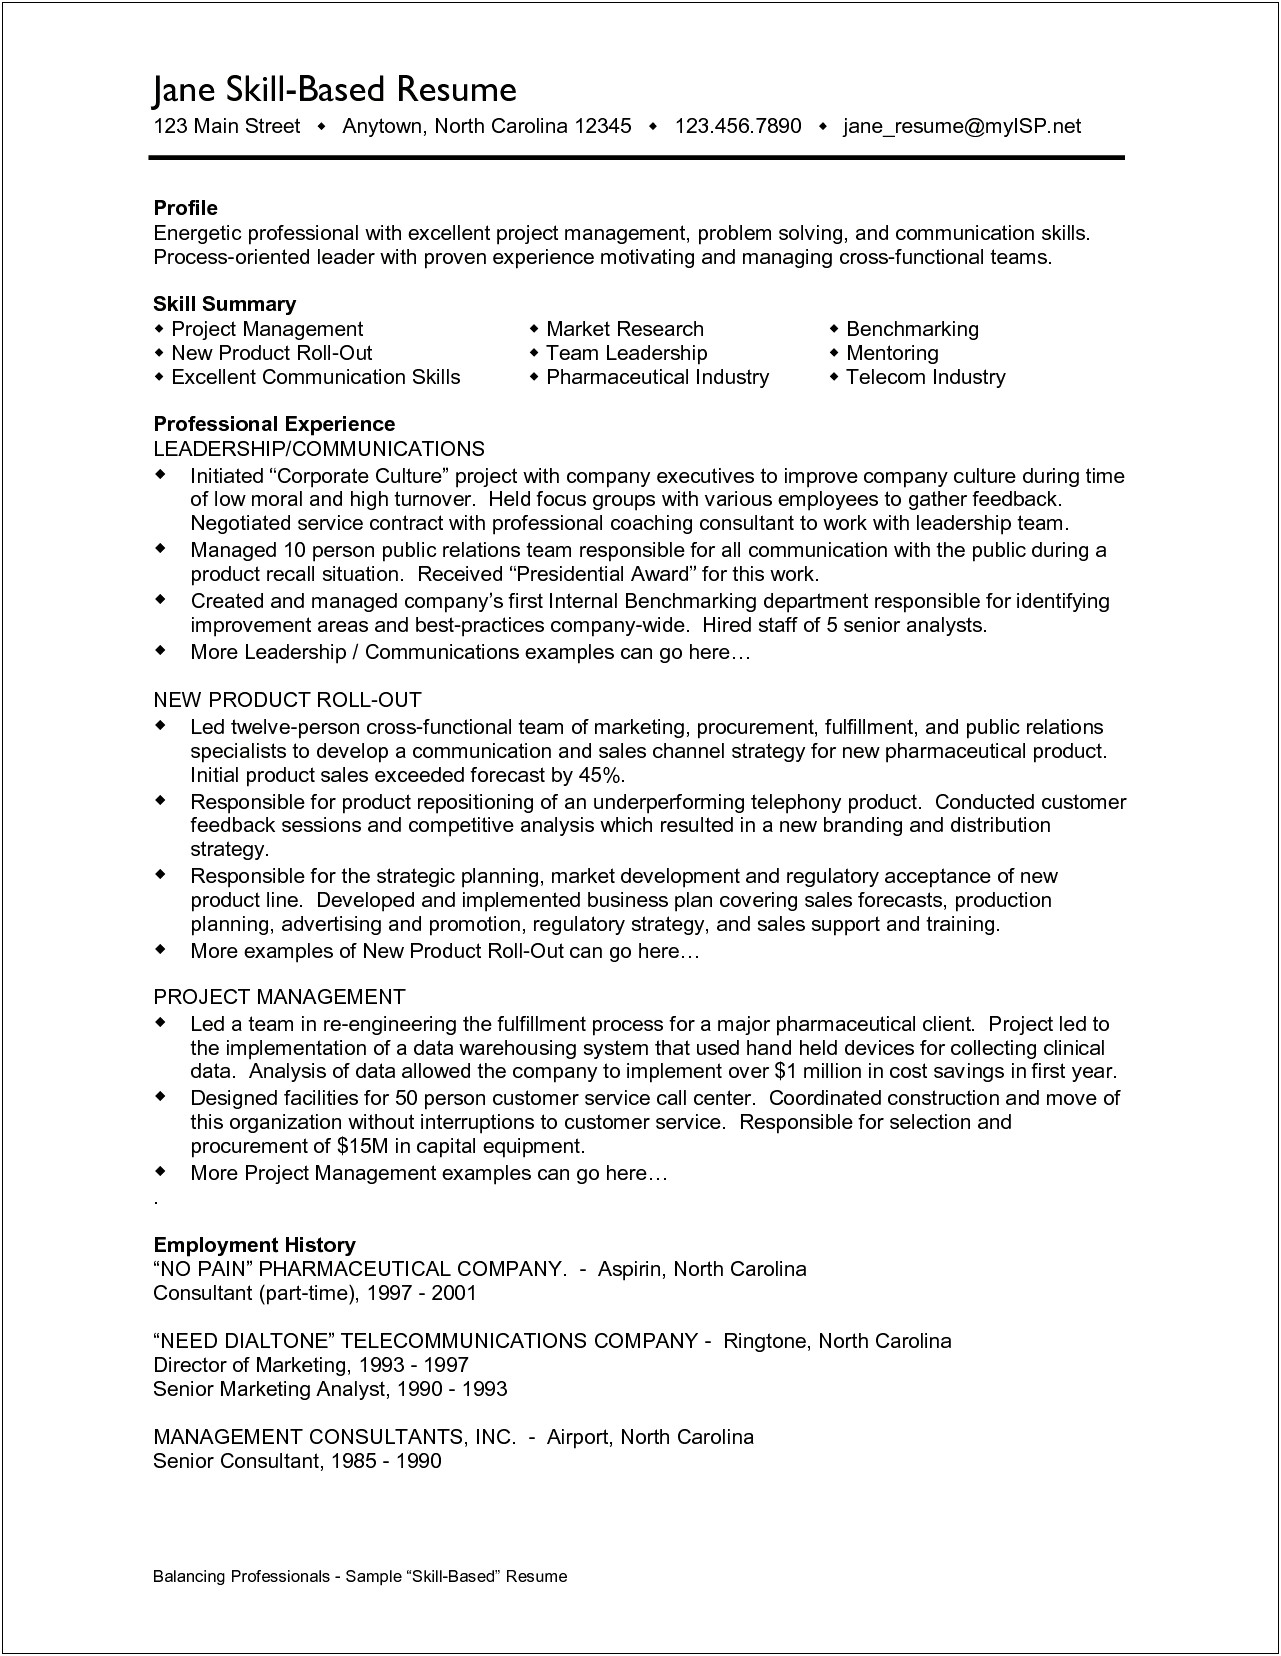 Examples Of Interpersonal Skills On Resume